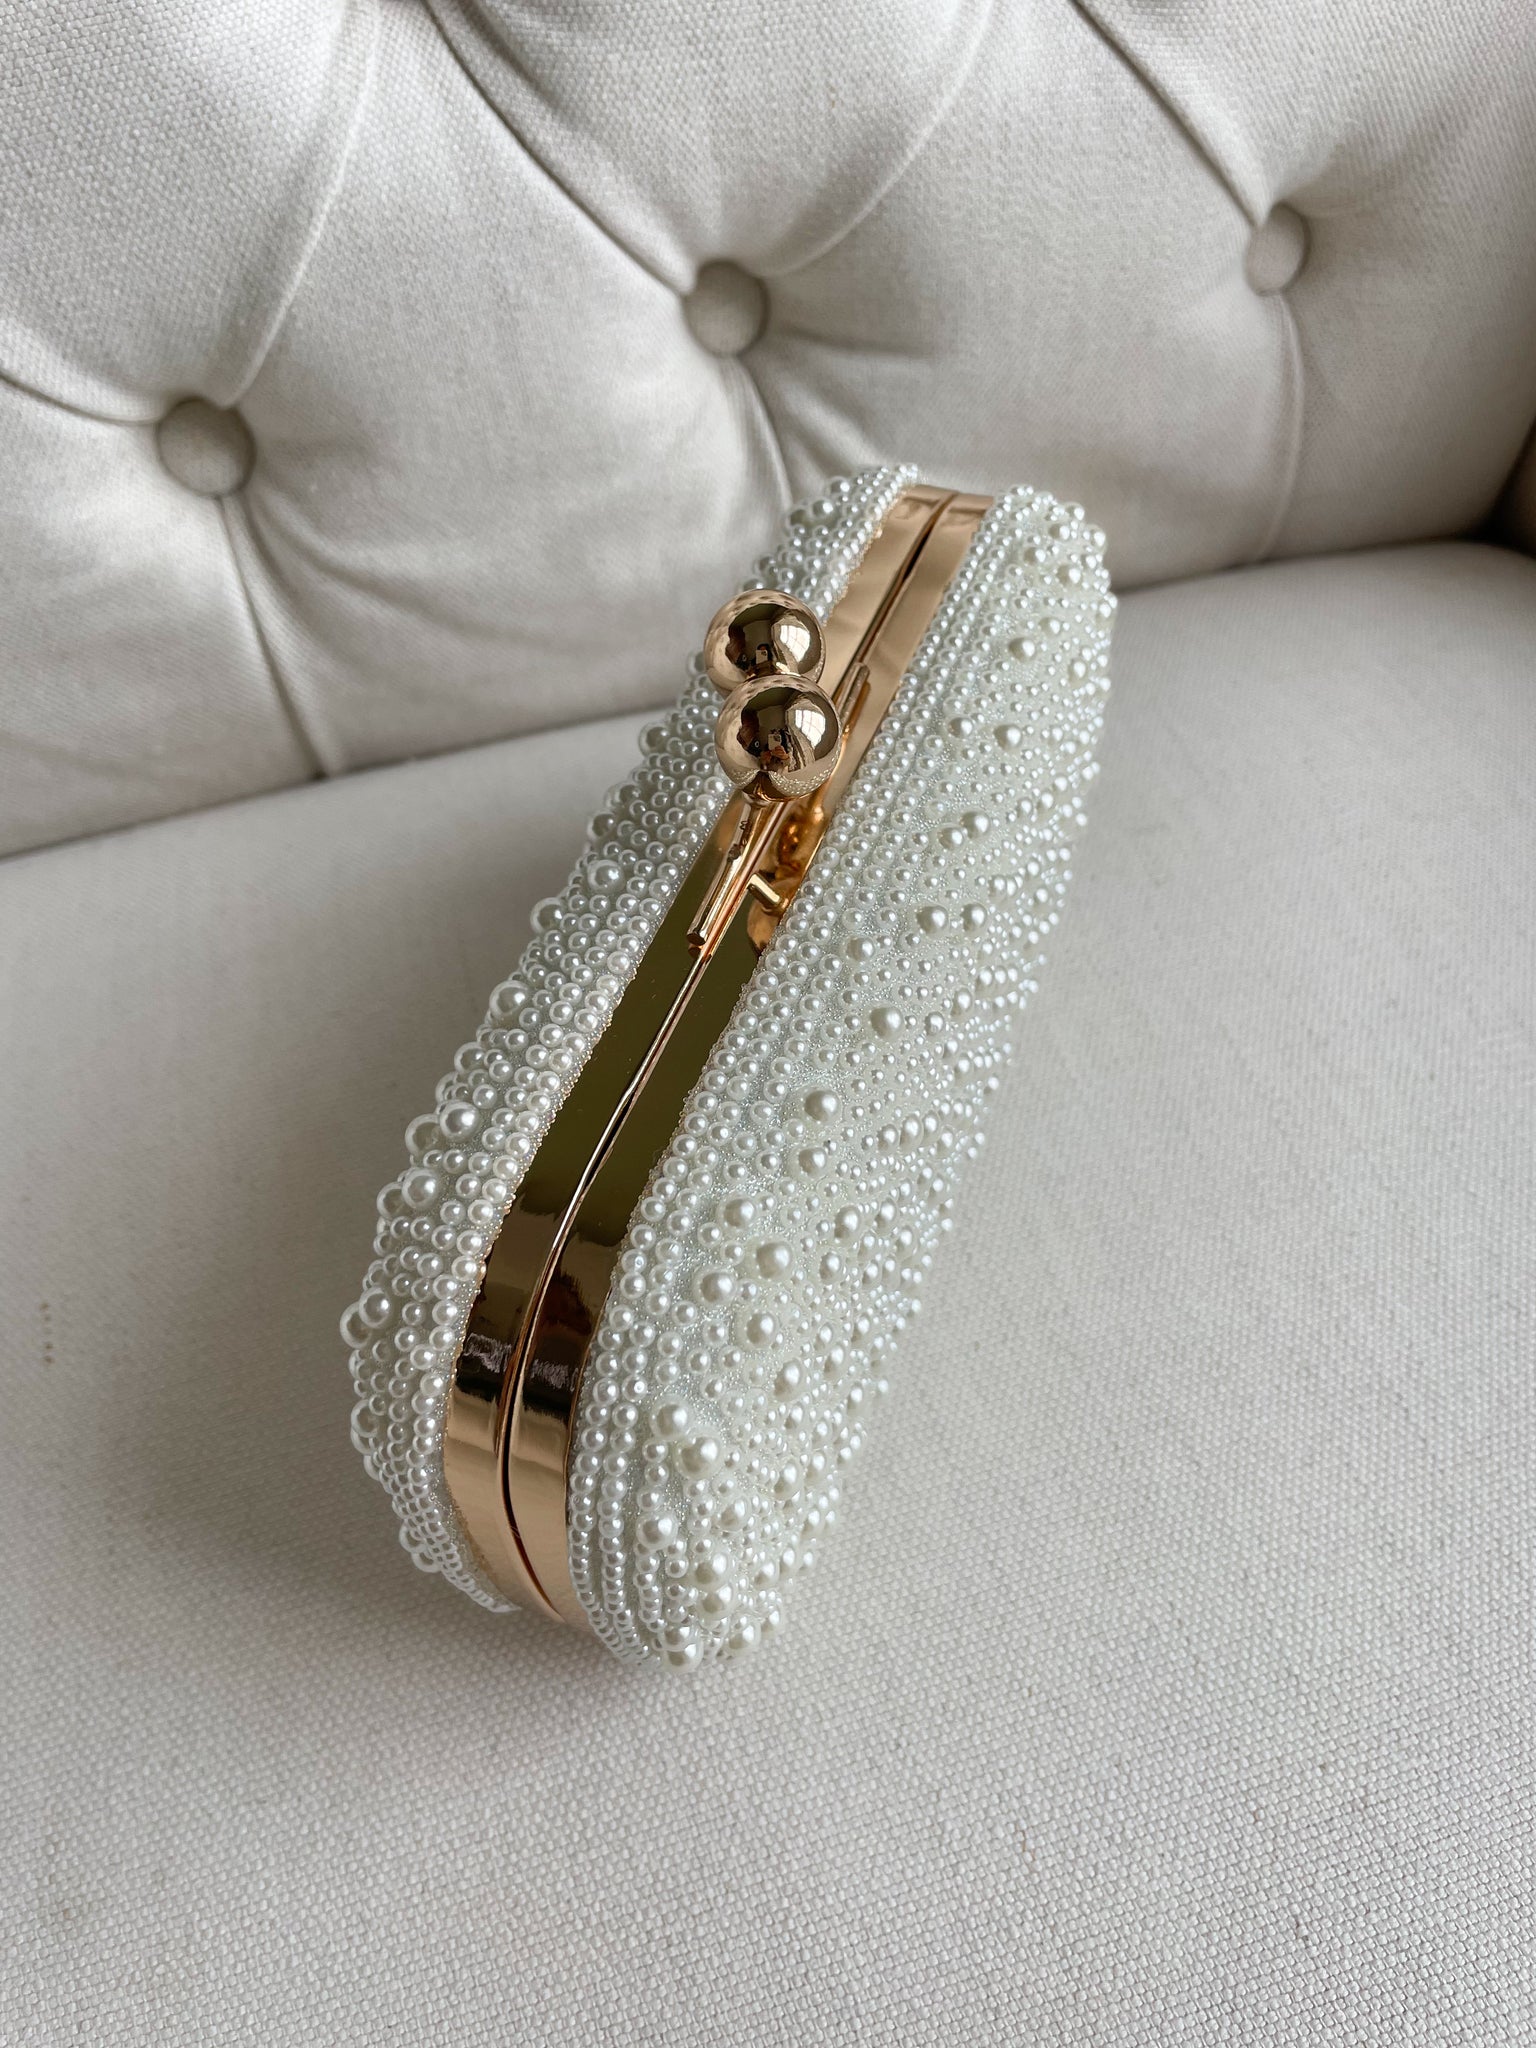 SWISNI Beautiful hand embroidery pearl oval clutch | Detachable Chain Sling  Strap | Ladies Purse Clutch Purse For Bridal, Casual, Party, Wedding,  Evening, Gift : Amazon.in: Fashion